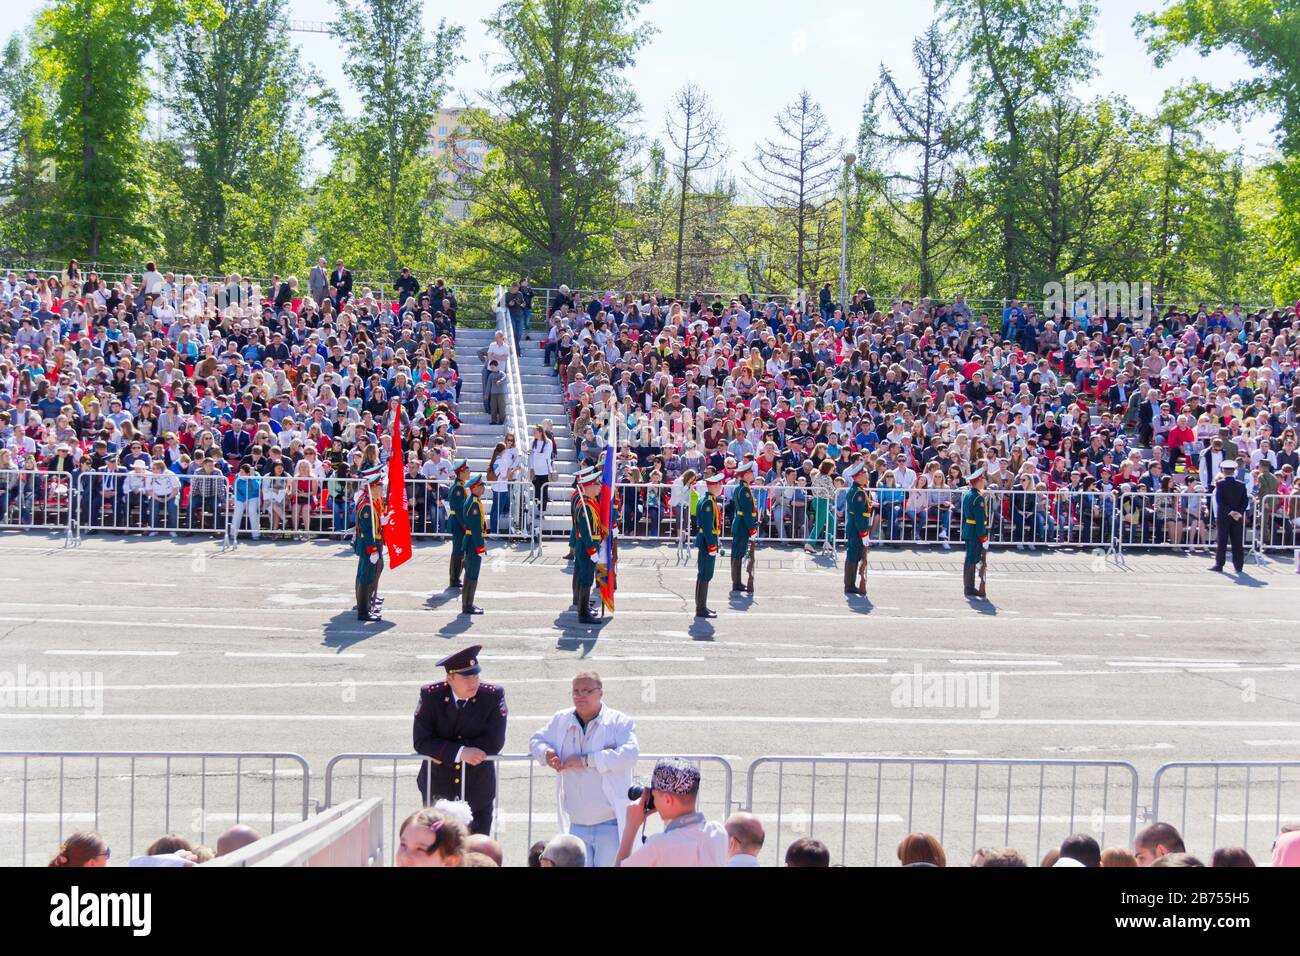 SAMARA, RUSSIA - MAY 9, 2016: Russian ceremony of opening military parade on annual Victory Day, May, 9, 2016 in Samara, Russia Stock Photo